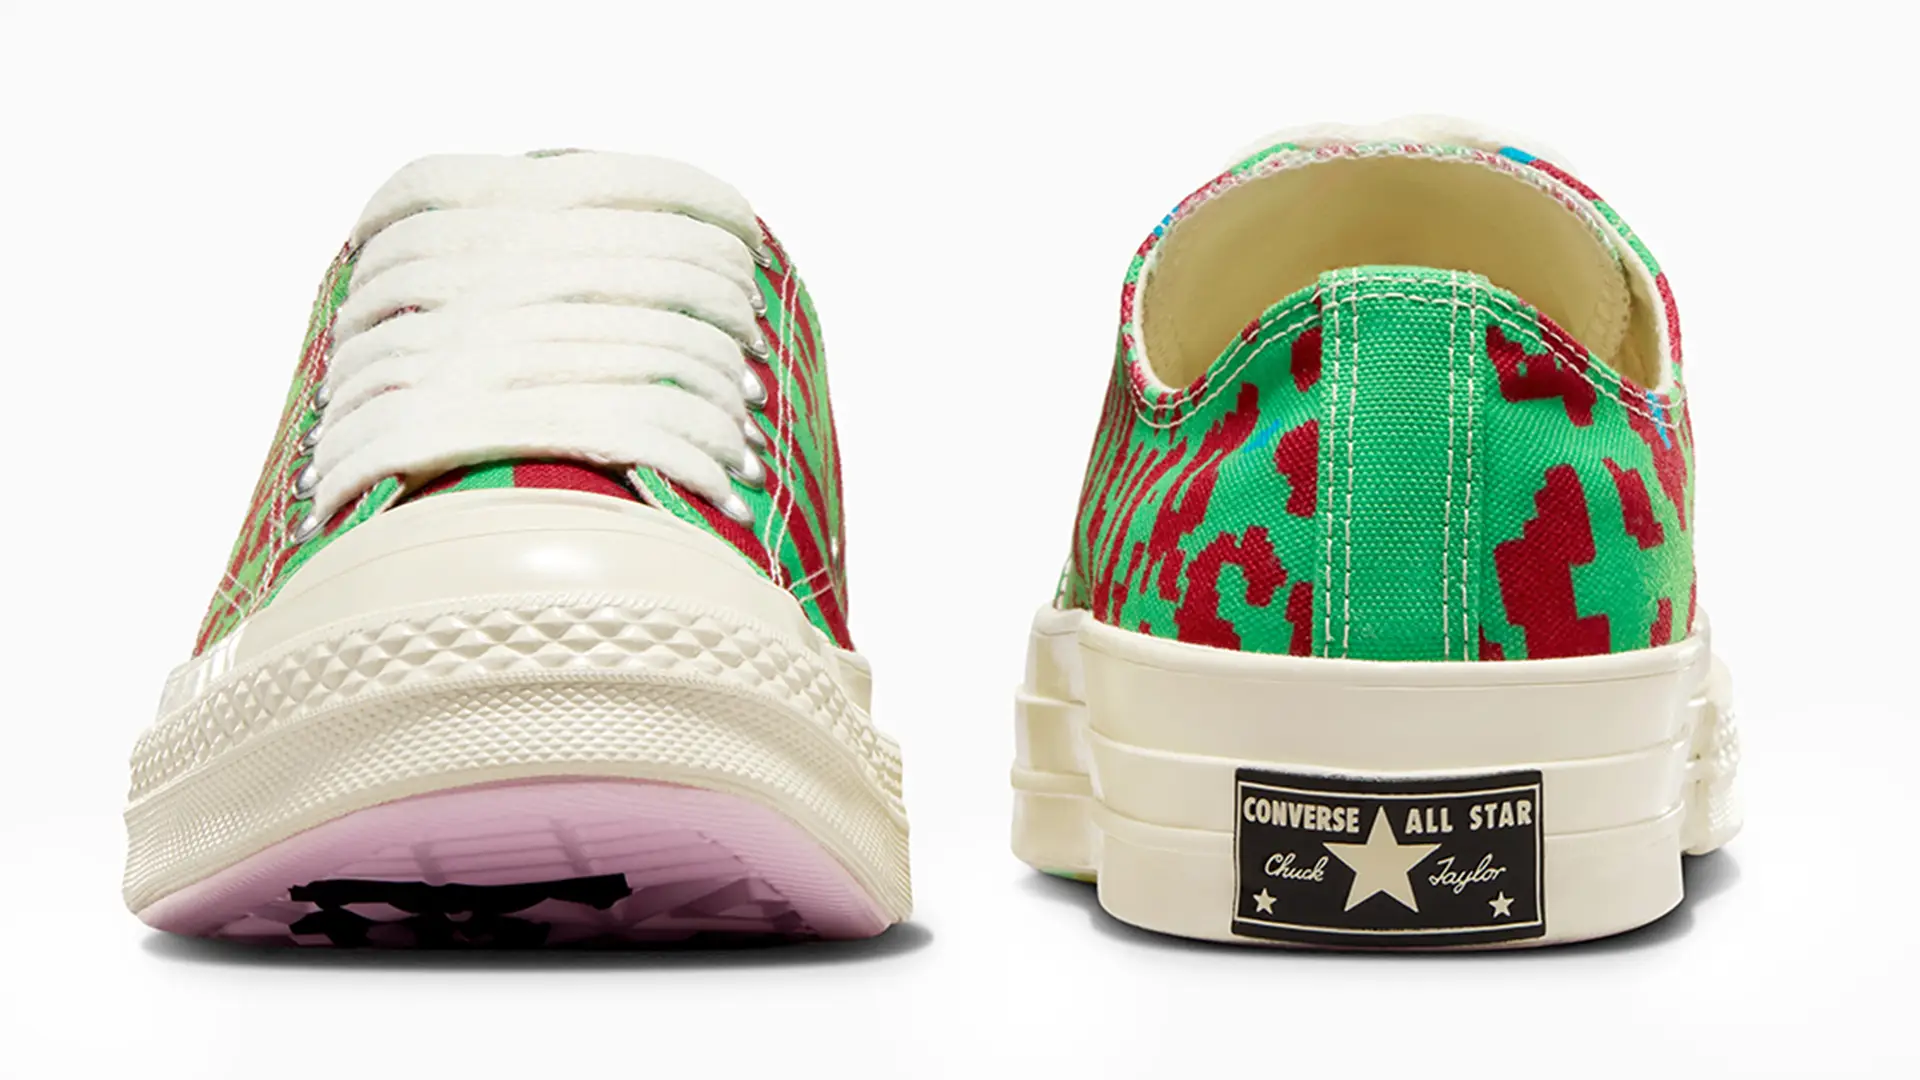 Tyler The Creator Jumps On the Digi Trend With New Converse x converse 80 s pro leather Collab